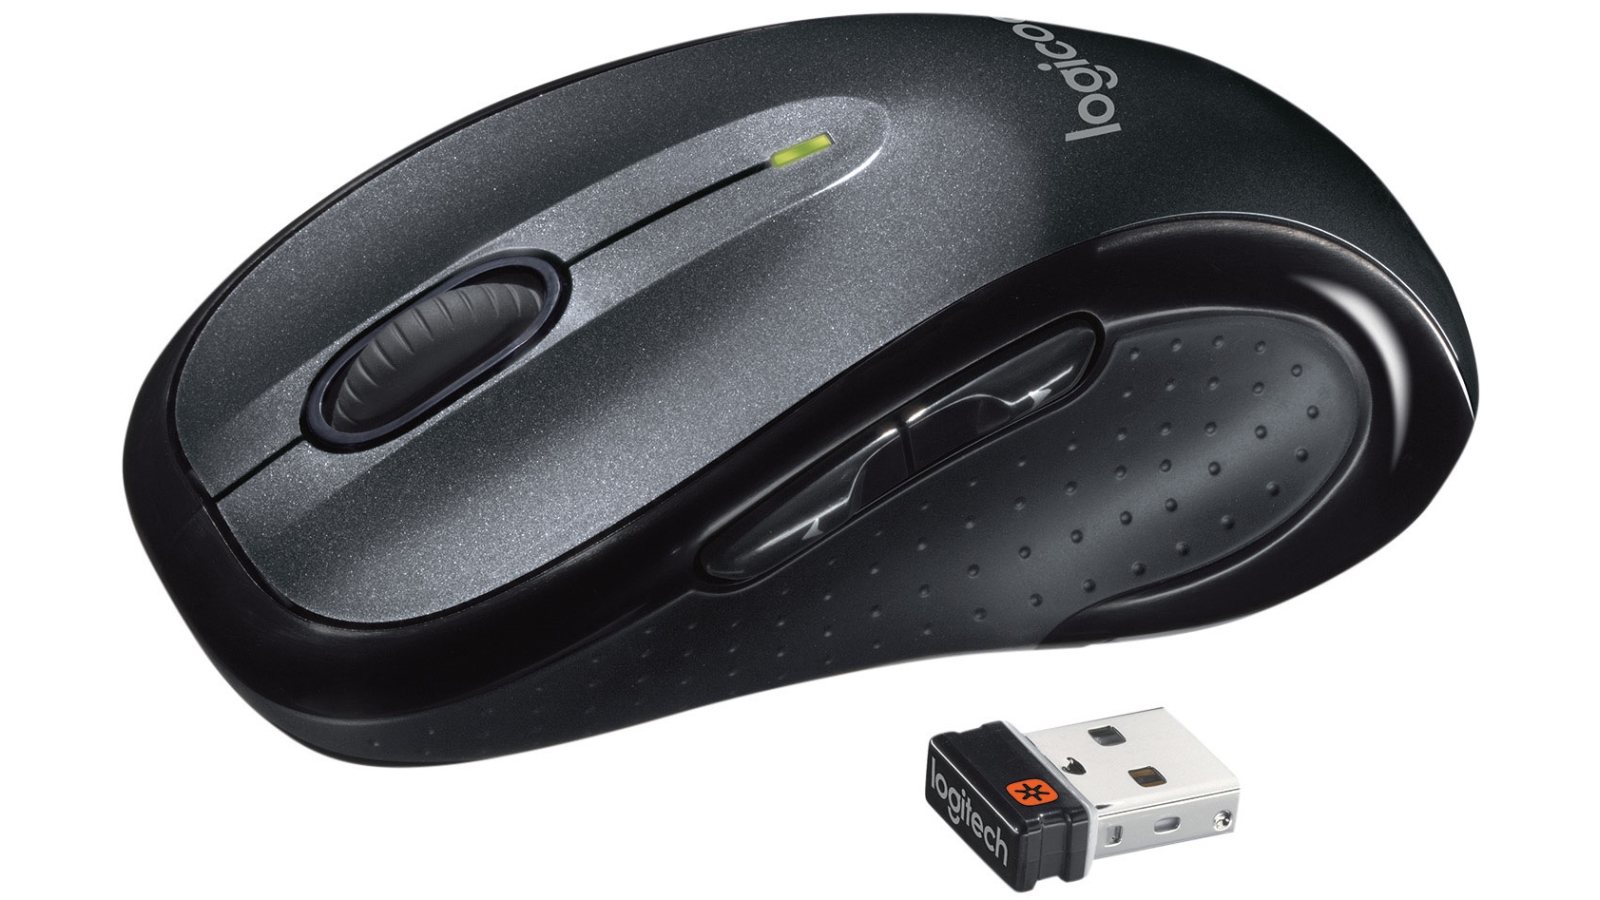 bracket make out packet Logitech M525 Vs Logitech M510 Mouse: Which One is Better for the Price?